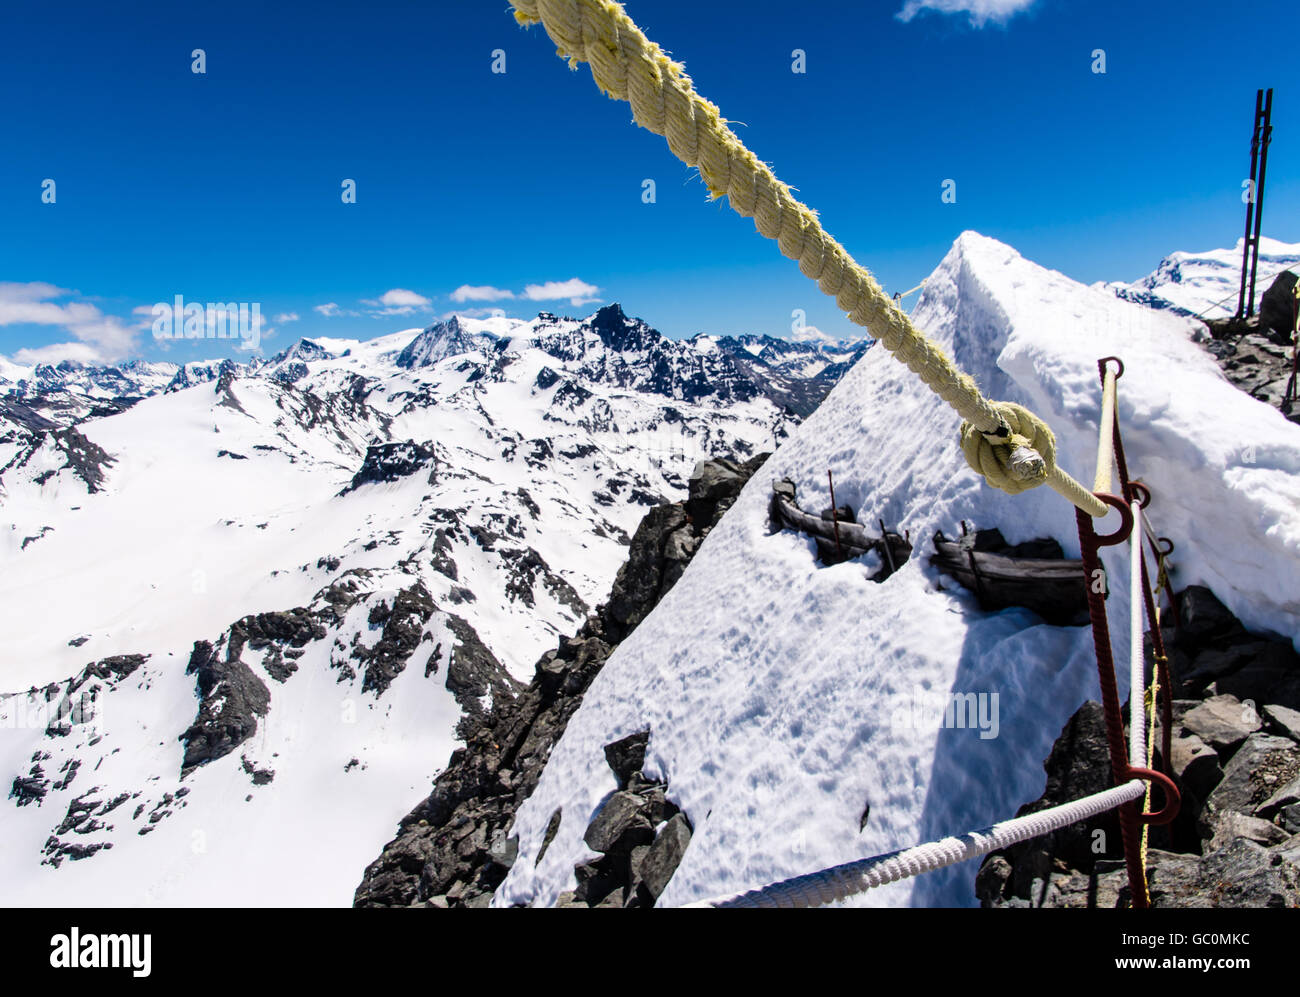 Views of the Swiss alps from Mont Fort in Verbier Switzerland in summer Stock Photo